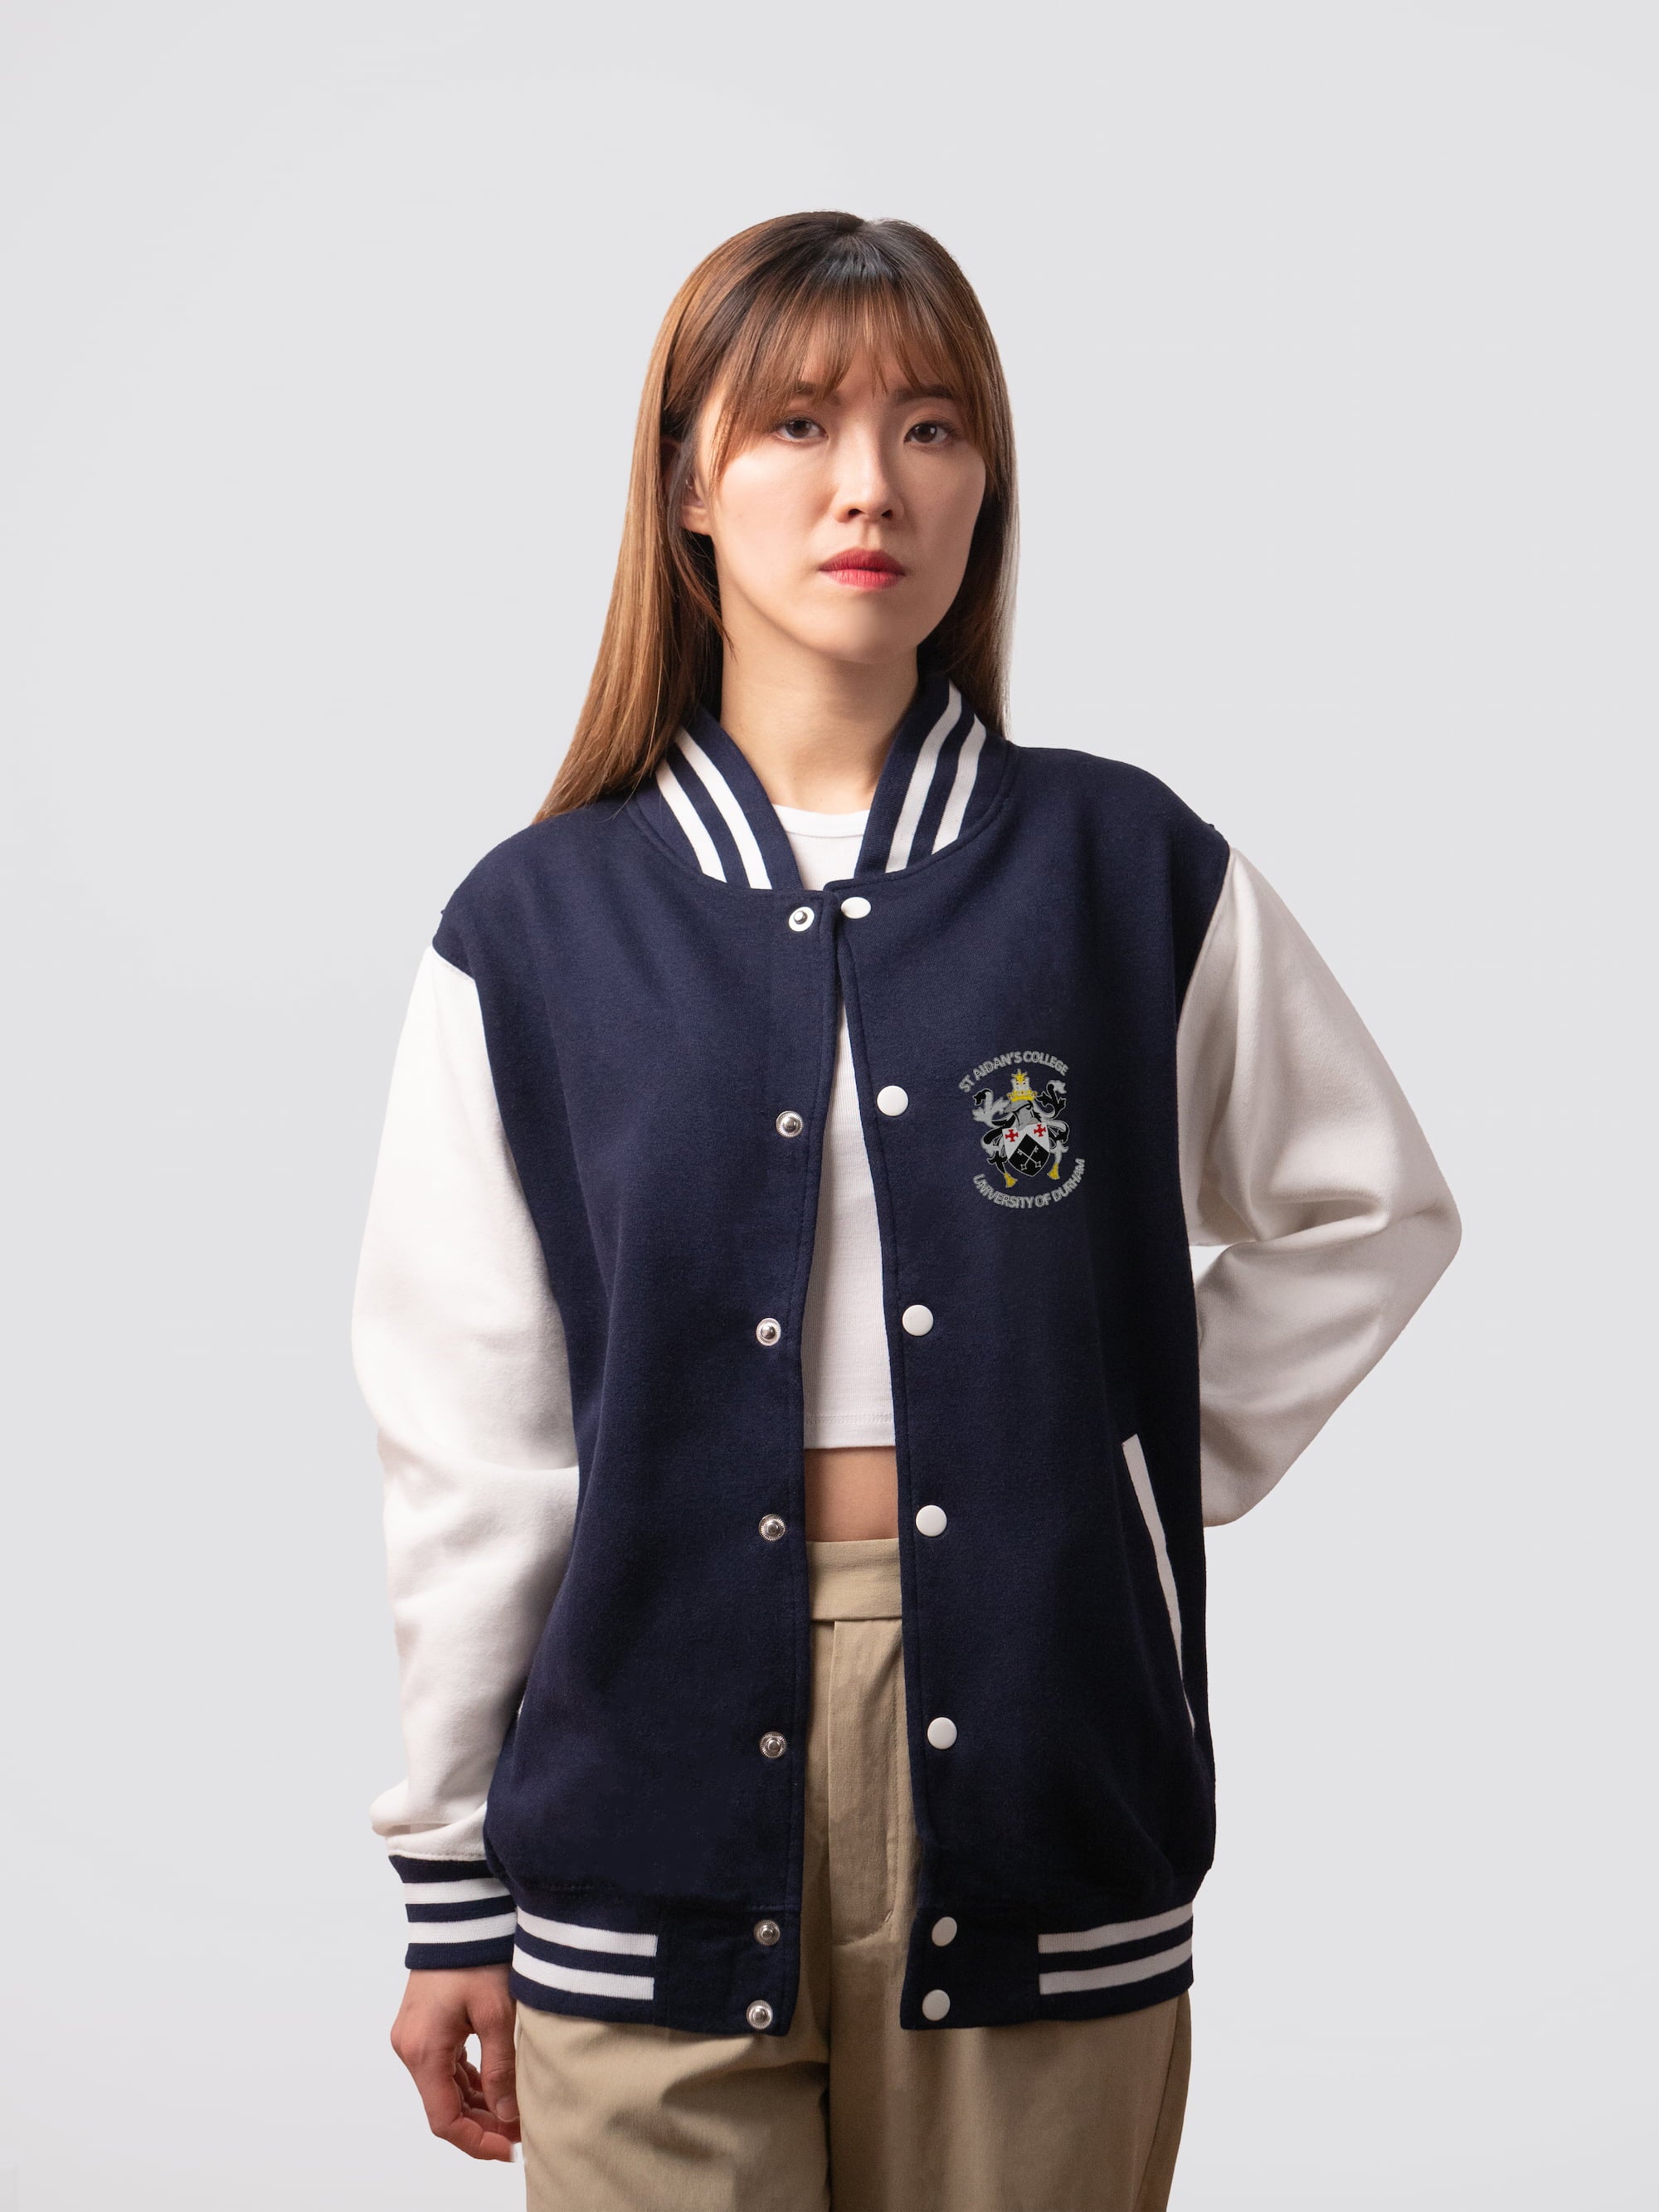 Retro style varsity jacket, with embroidered St Aidan's crest